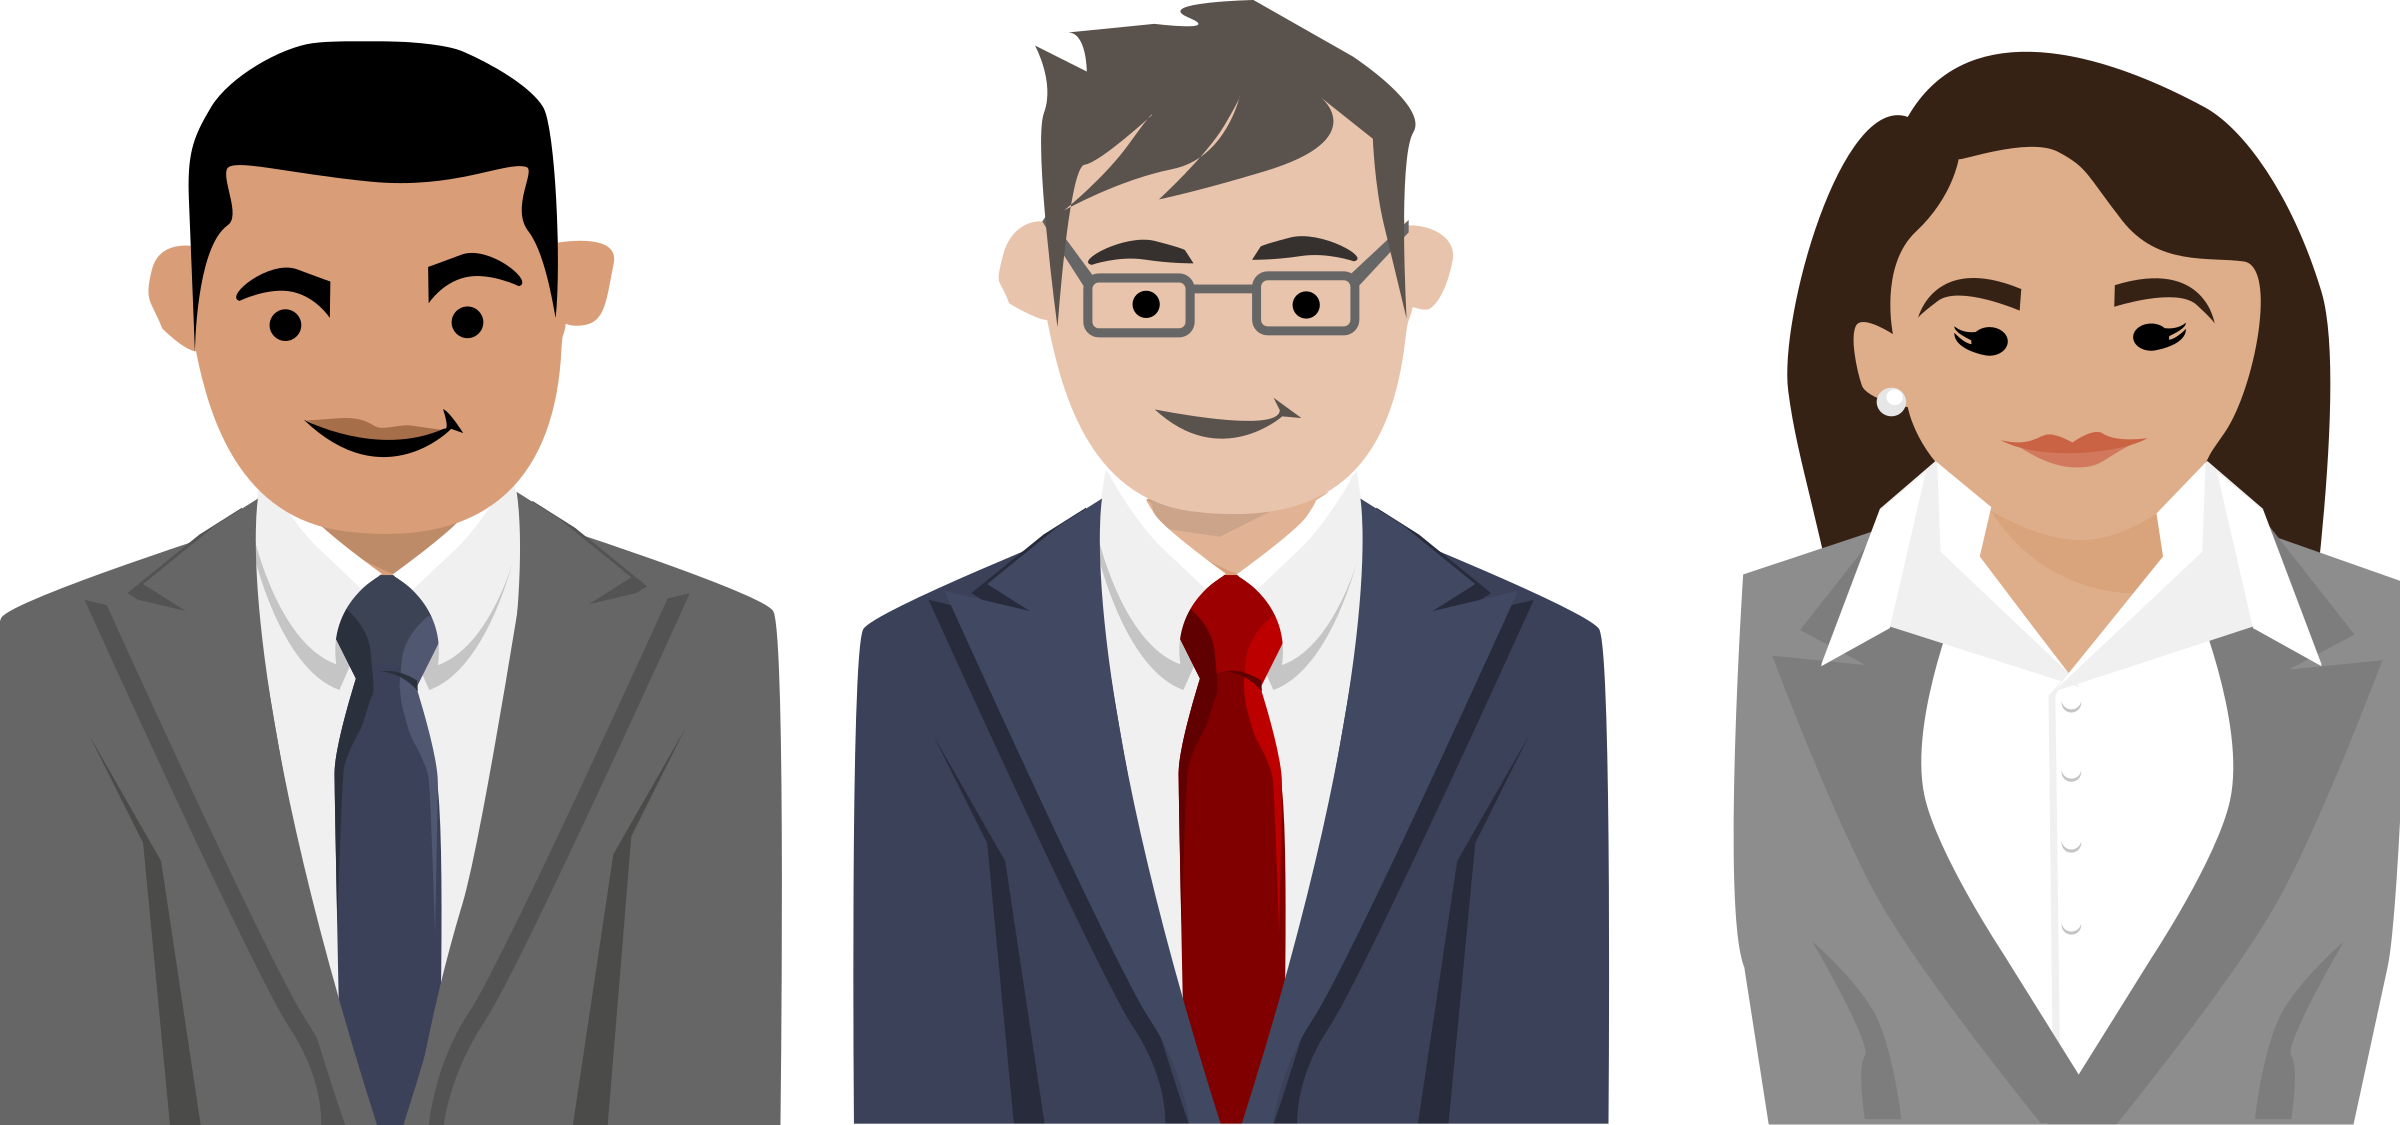 Business people characters.